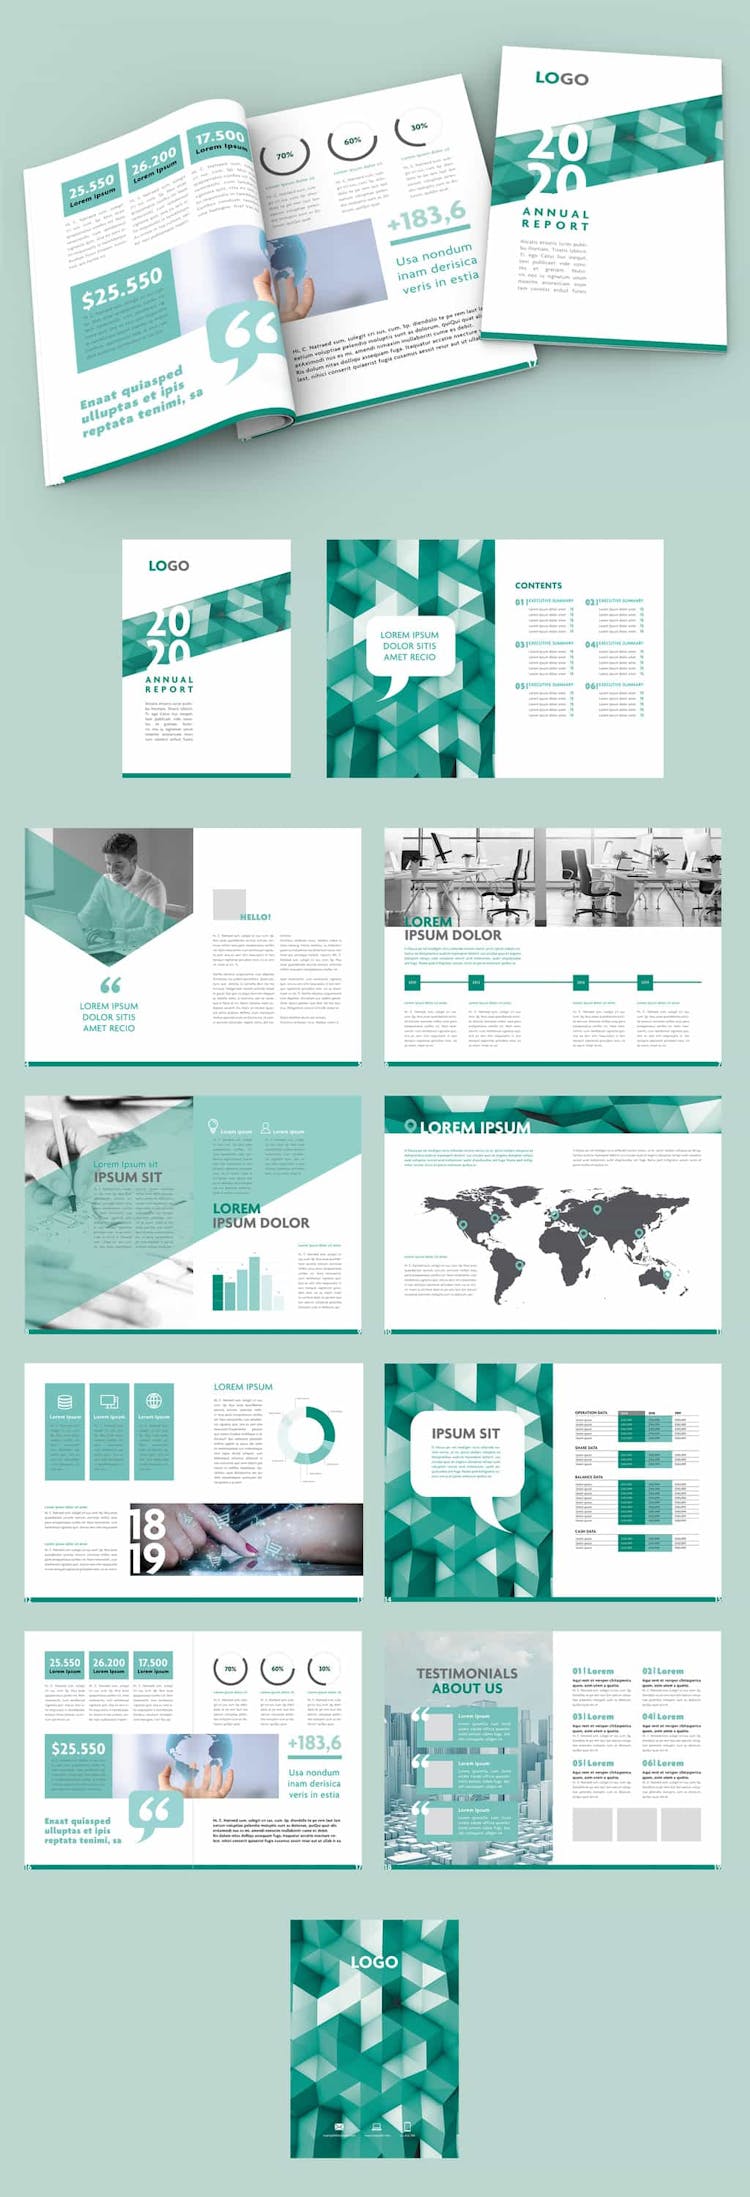 Download 60 Modern Annual Report Design Templates Free And Paid Redokun